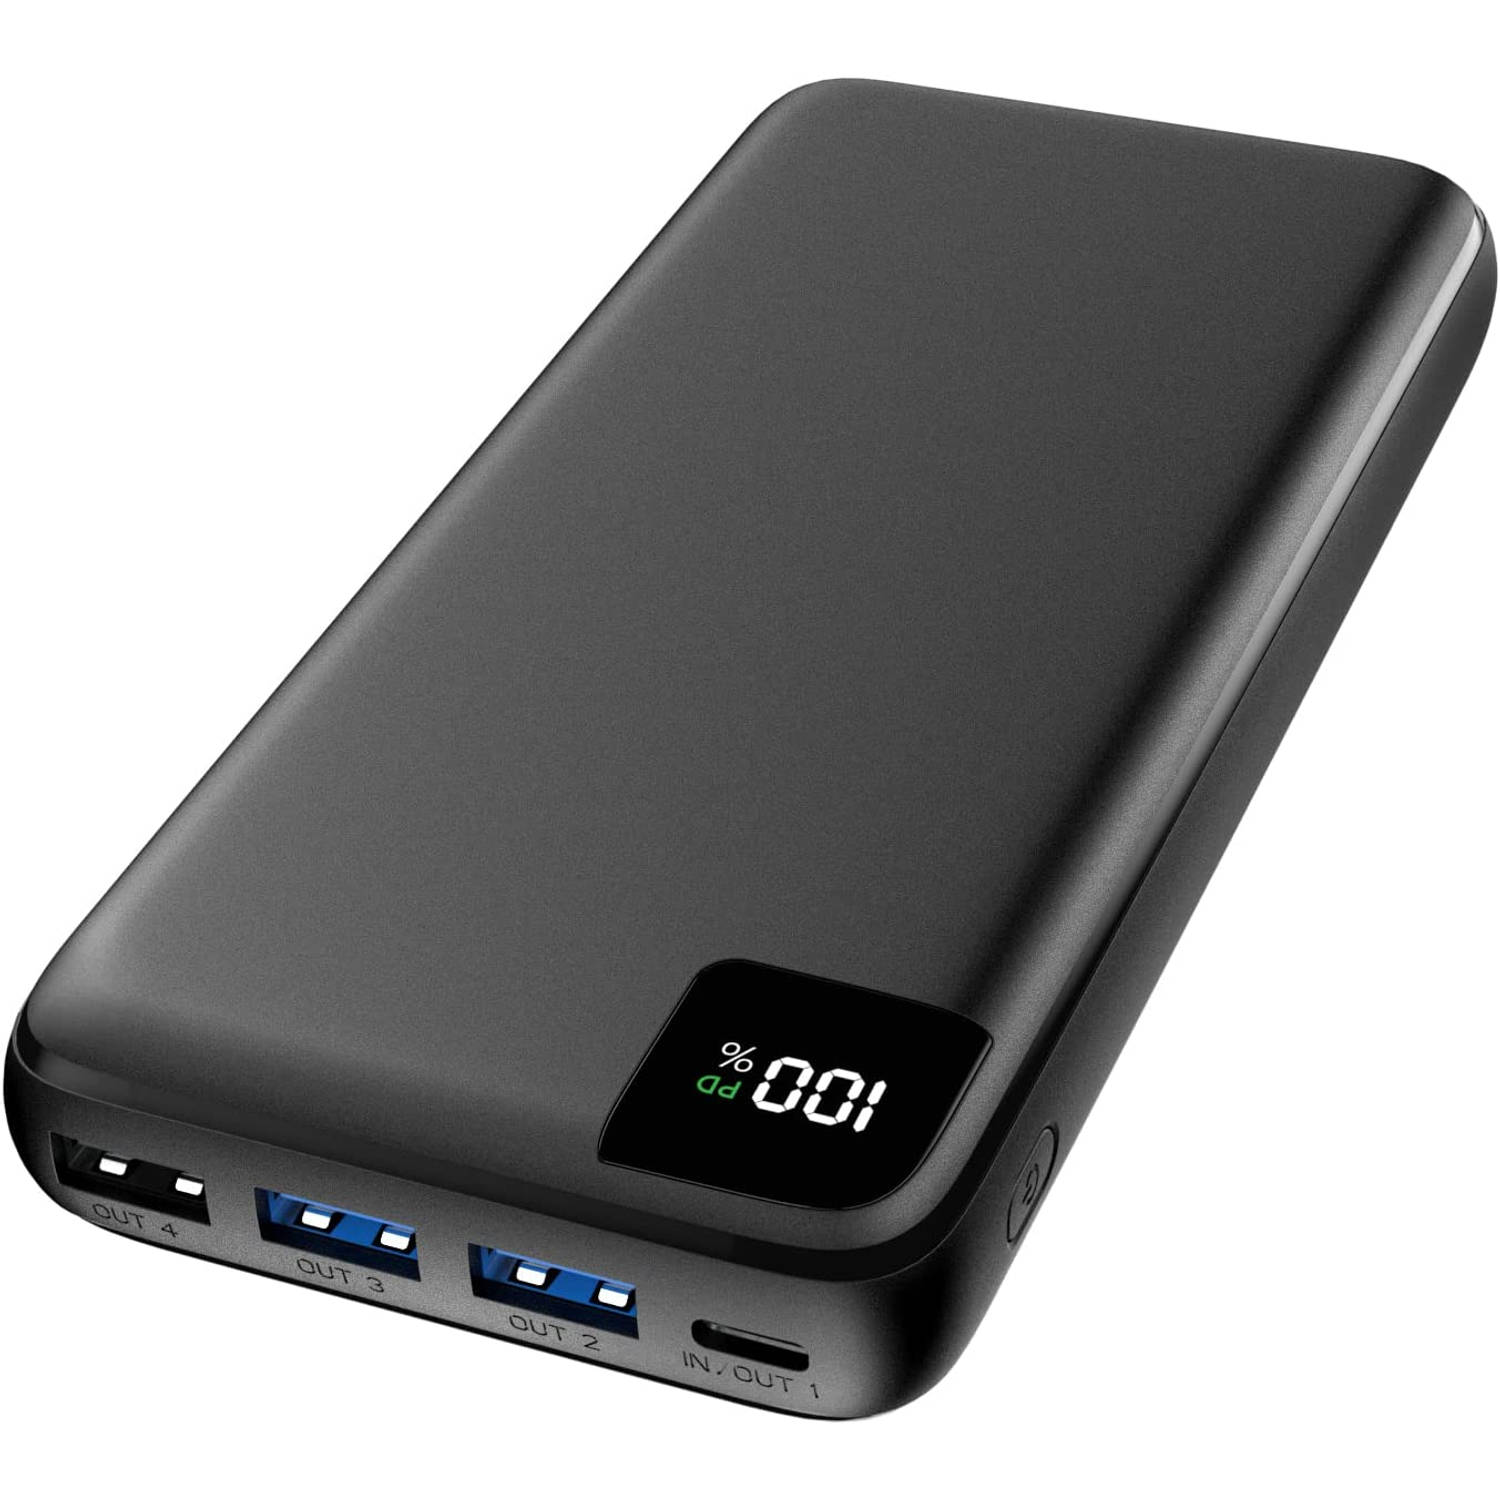 Strex Powerbank - 27.000 mAh - 22.5W Snellader - USB-A/USB-C - LED Indicatie - Universele Powerbank voor o.a. iPhone/Samsung